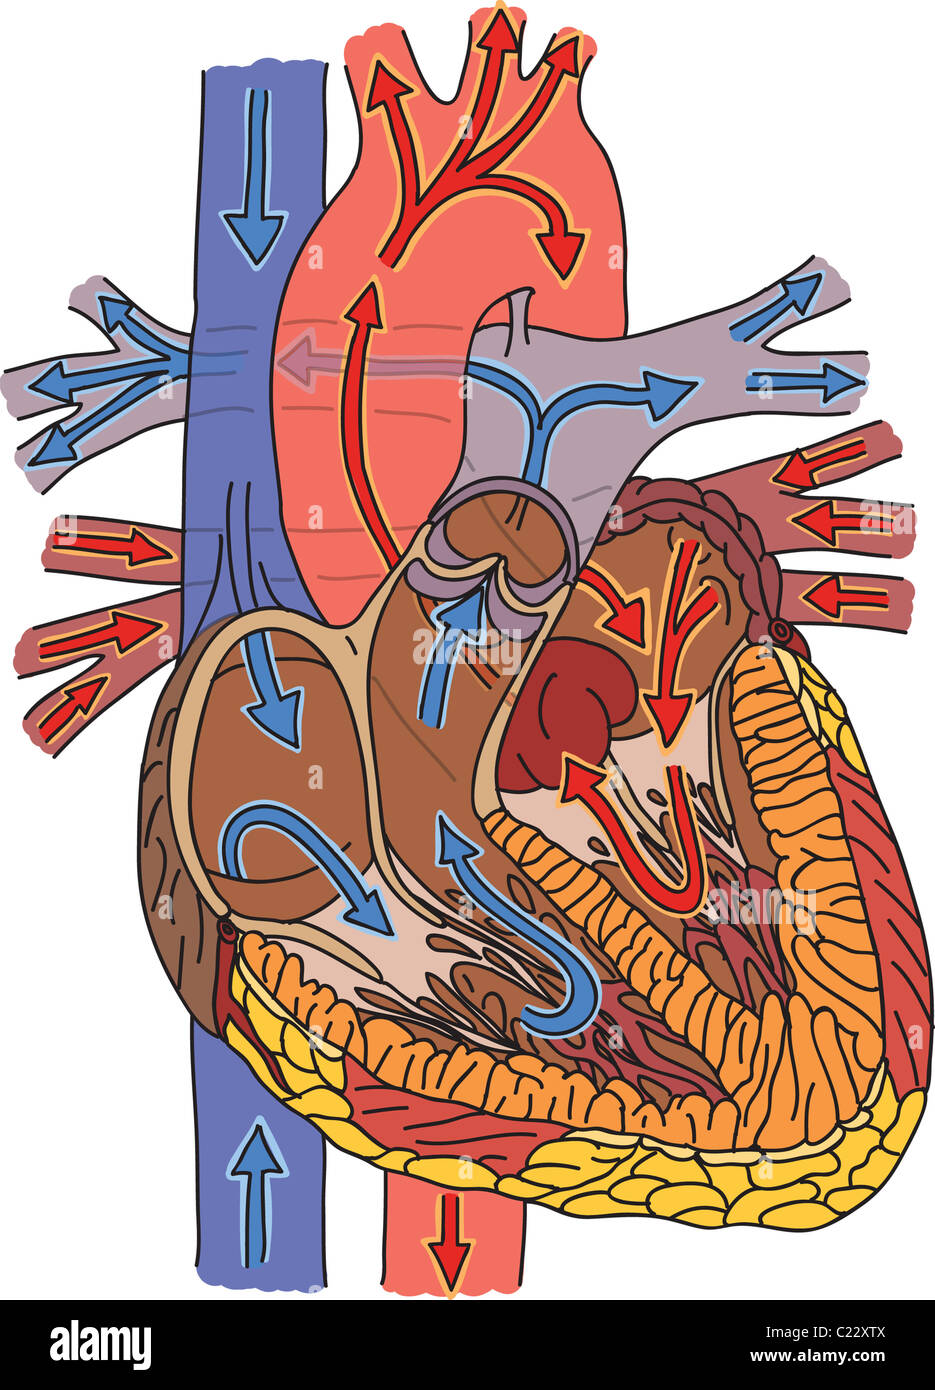 Structure of human heart and blood flow illustration Stock Photo